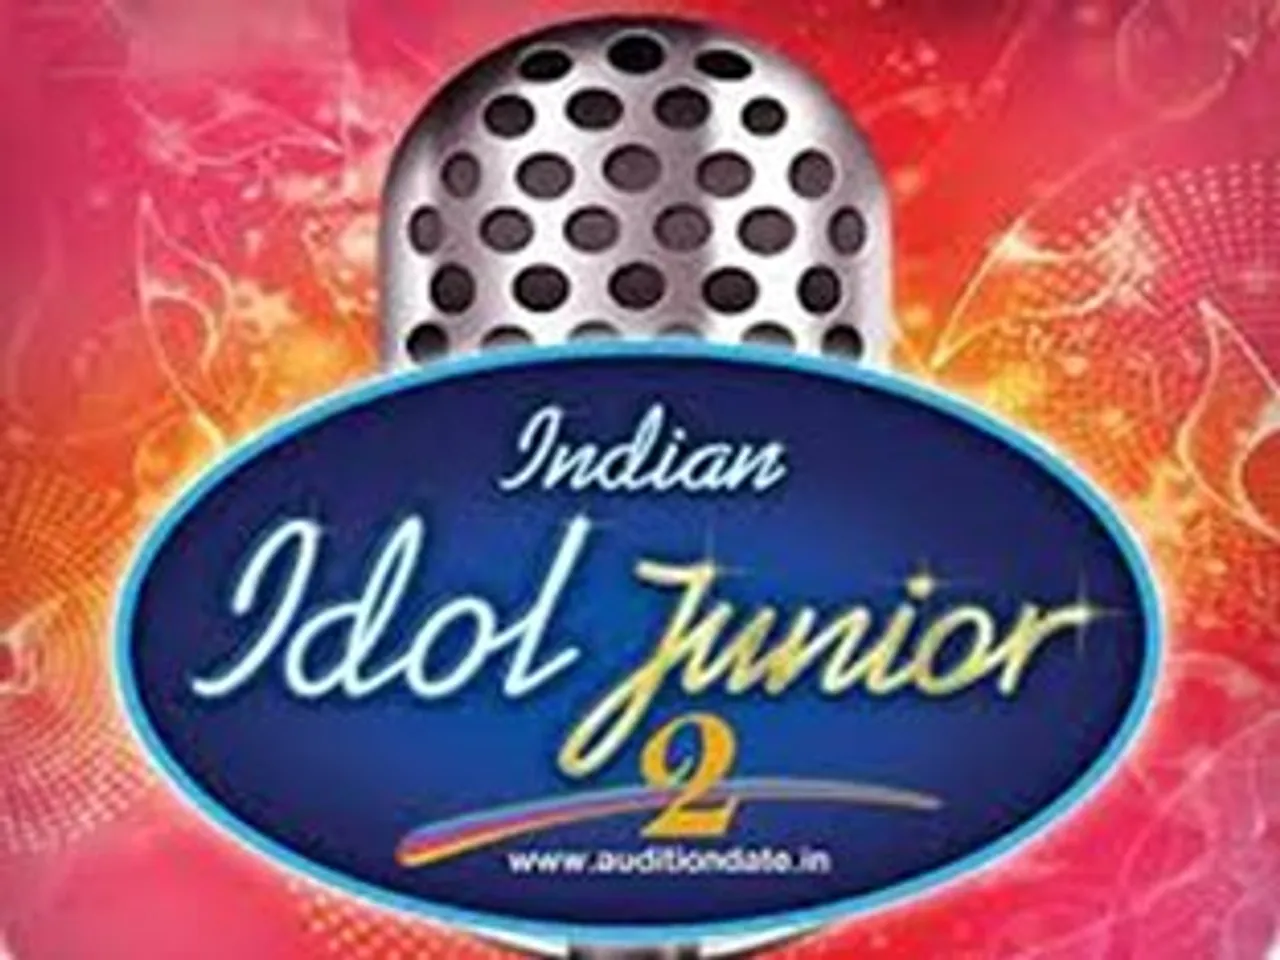 'Indian Idol Junior Season 2' opens its voting phase exclusively with Sony Liv